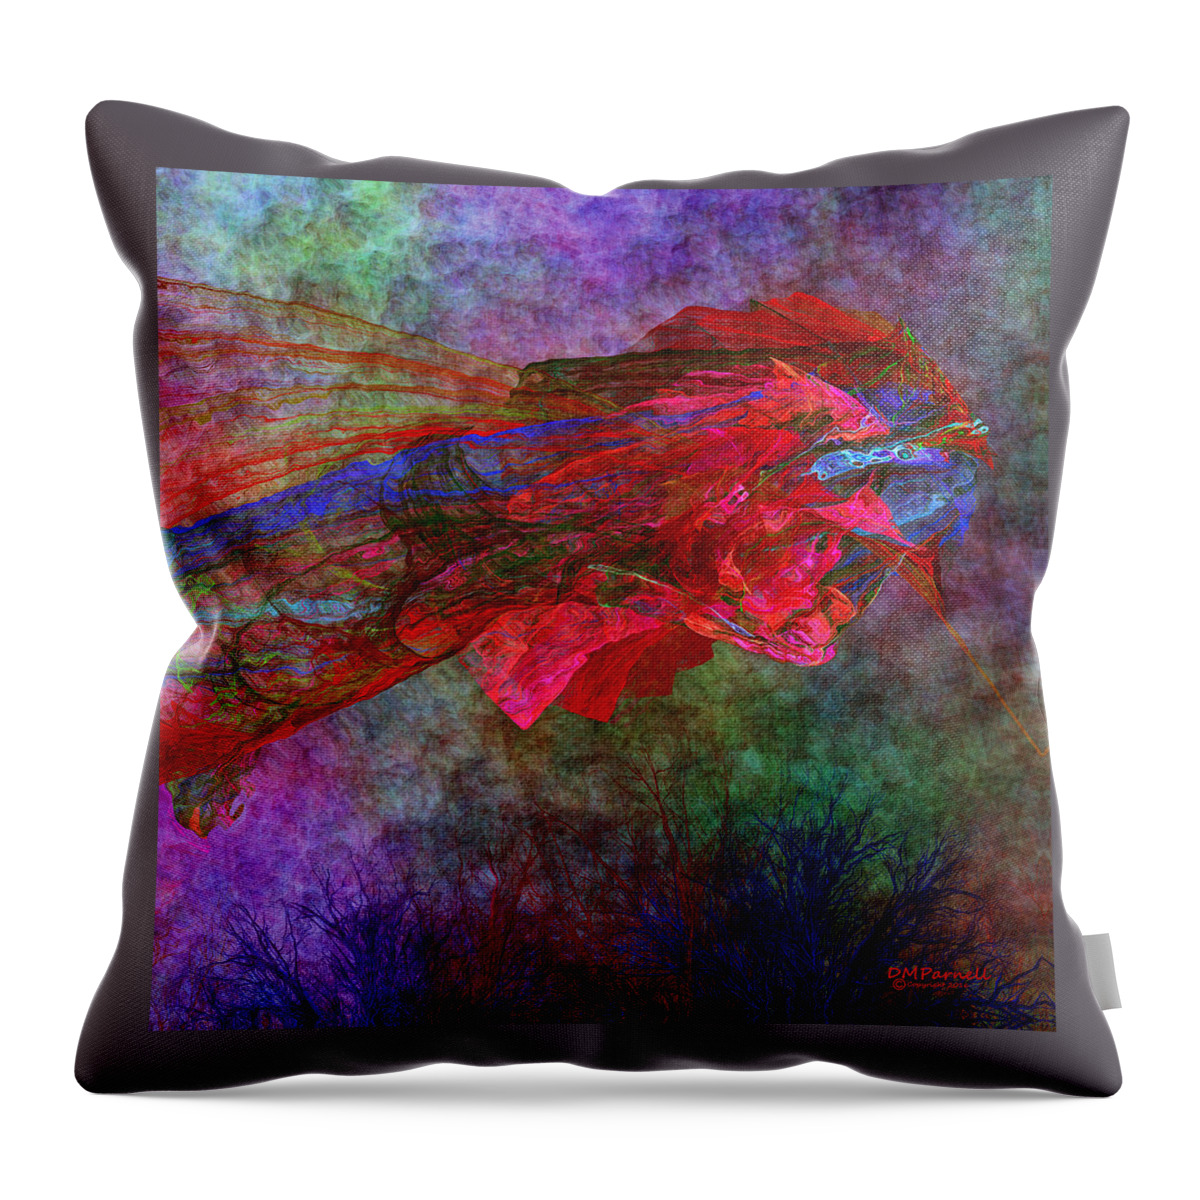 Kite Throw Pillow featuring the digital art Chinese Kite by Diane Parnell